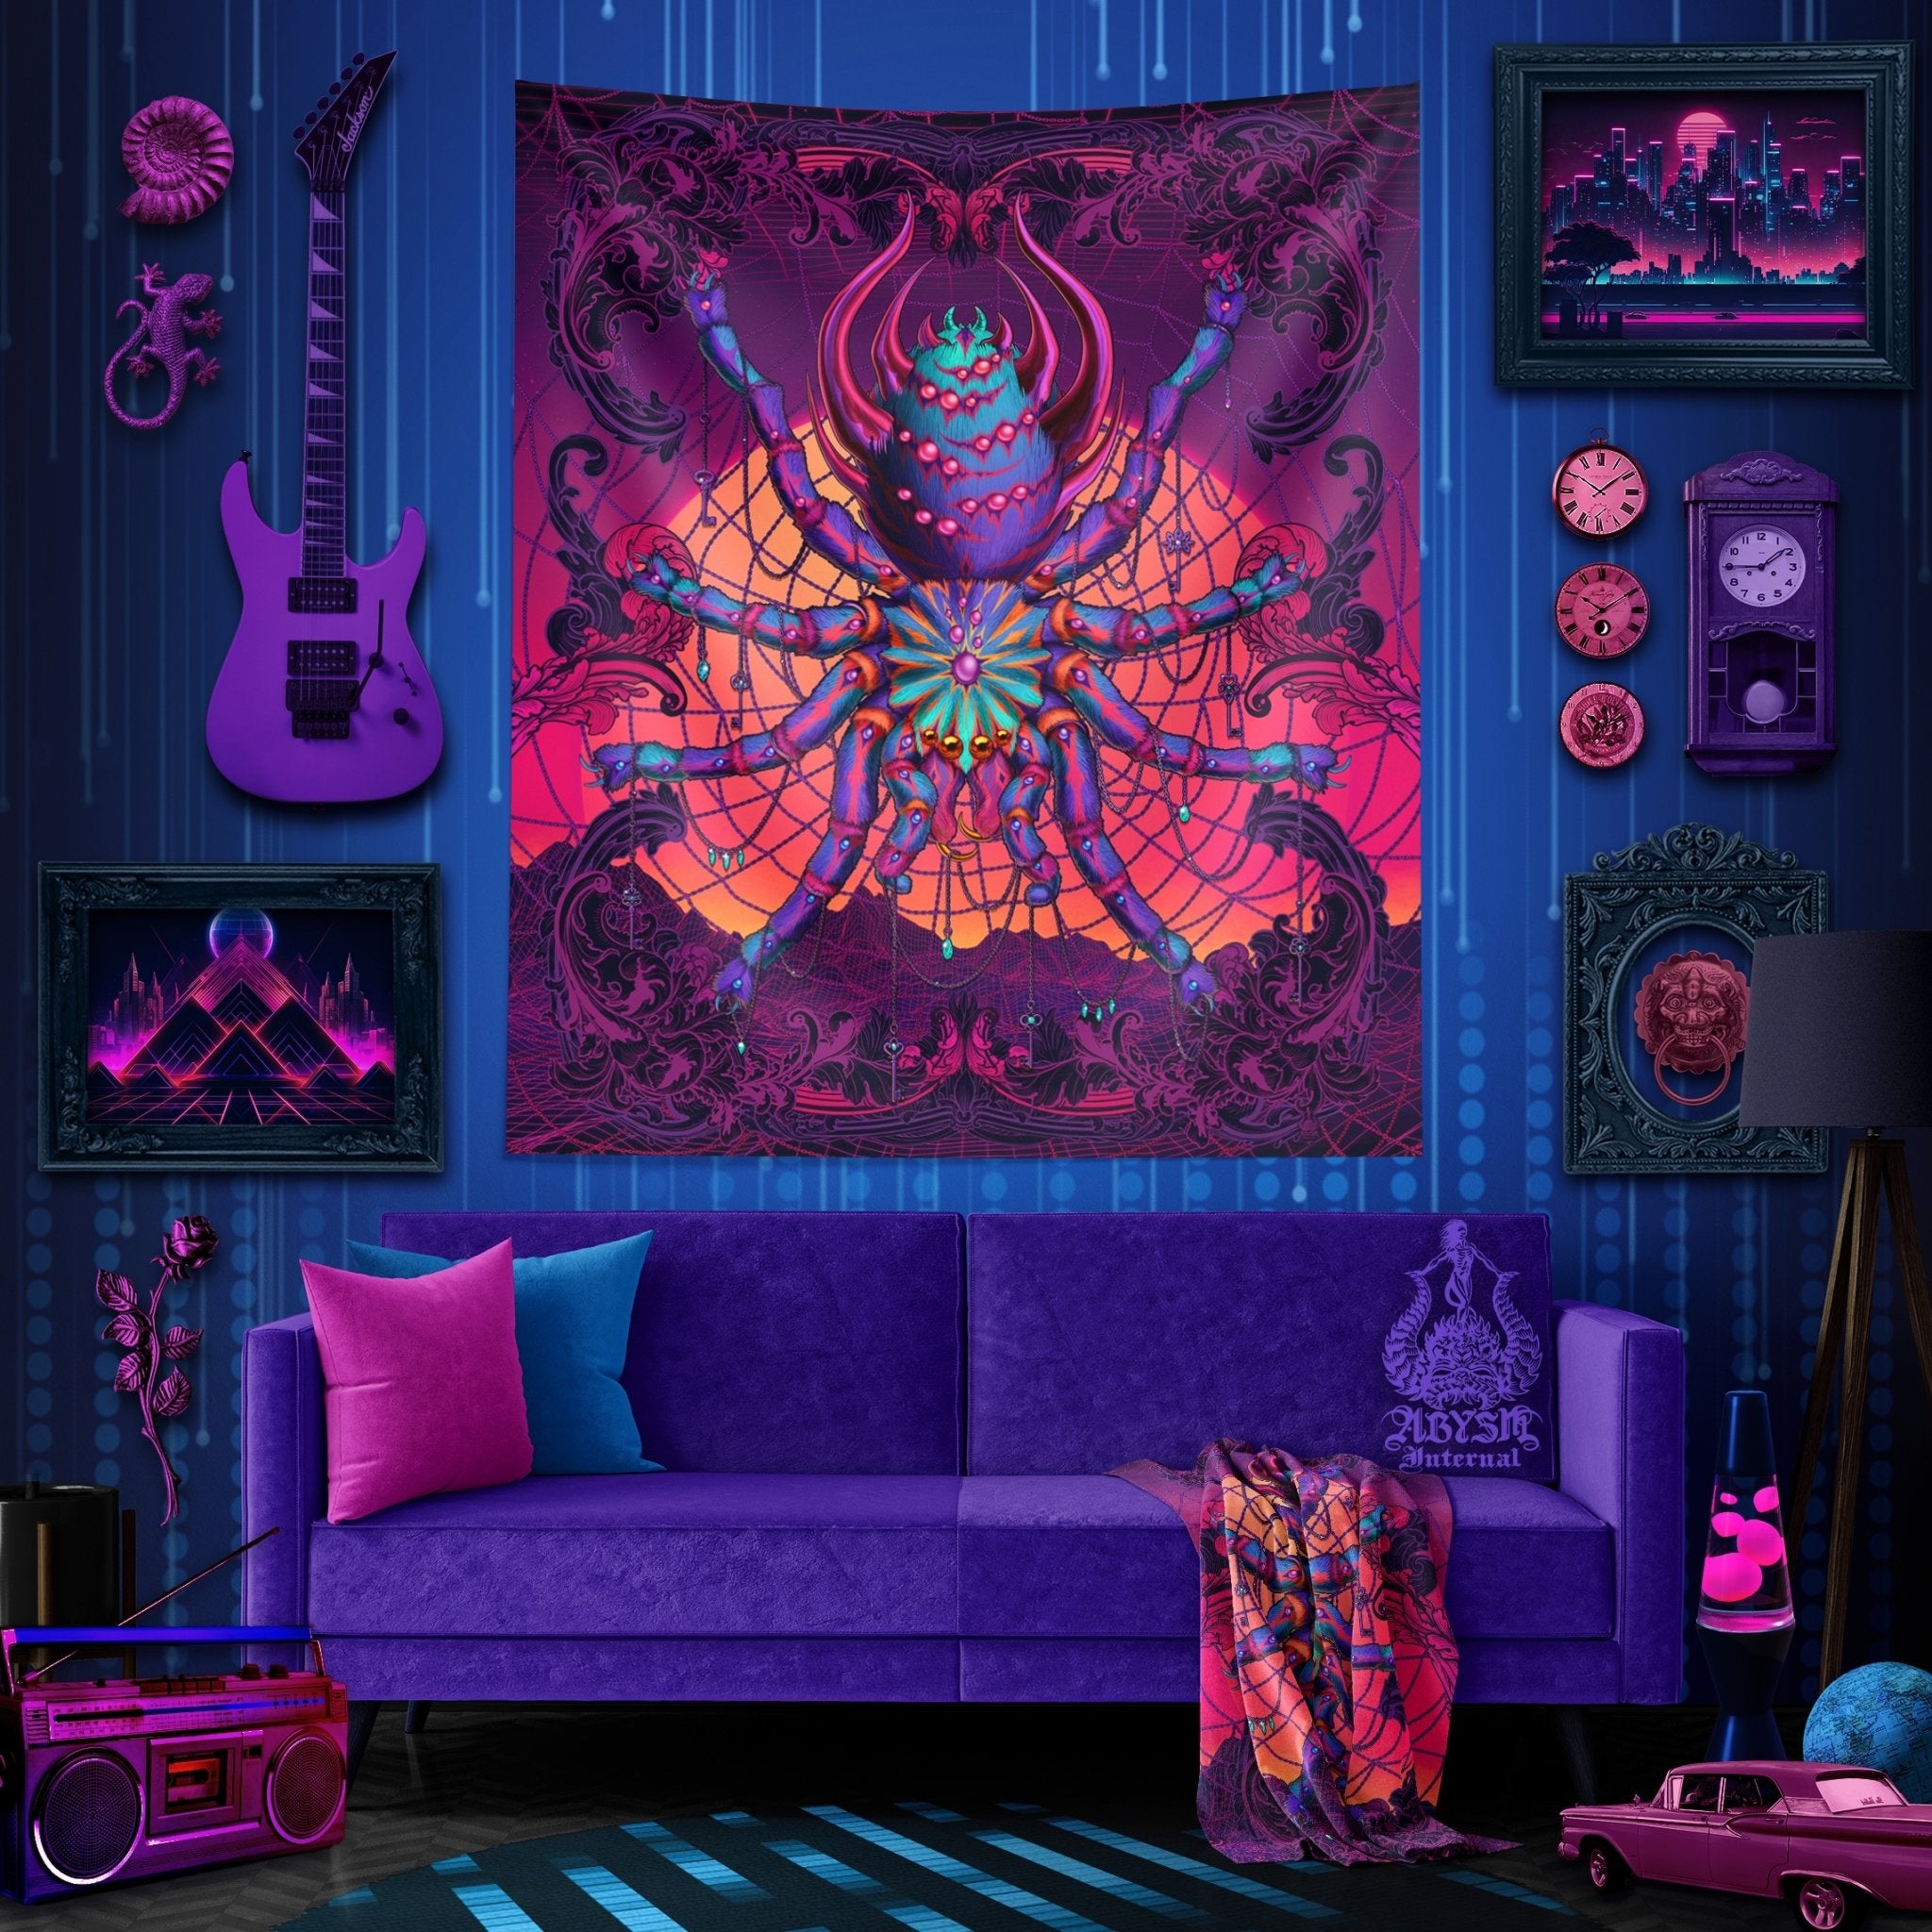 Psychedelic Tapestry, Vaporwave Wall Hanging, Retrowave 80s Home Decor, Synthwave Art Print, Eclectic and Funky - Spider, Tarantula - Abysm Internal